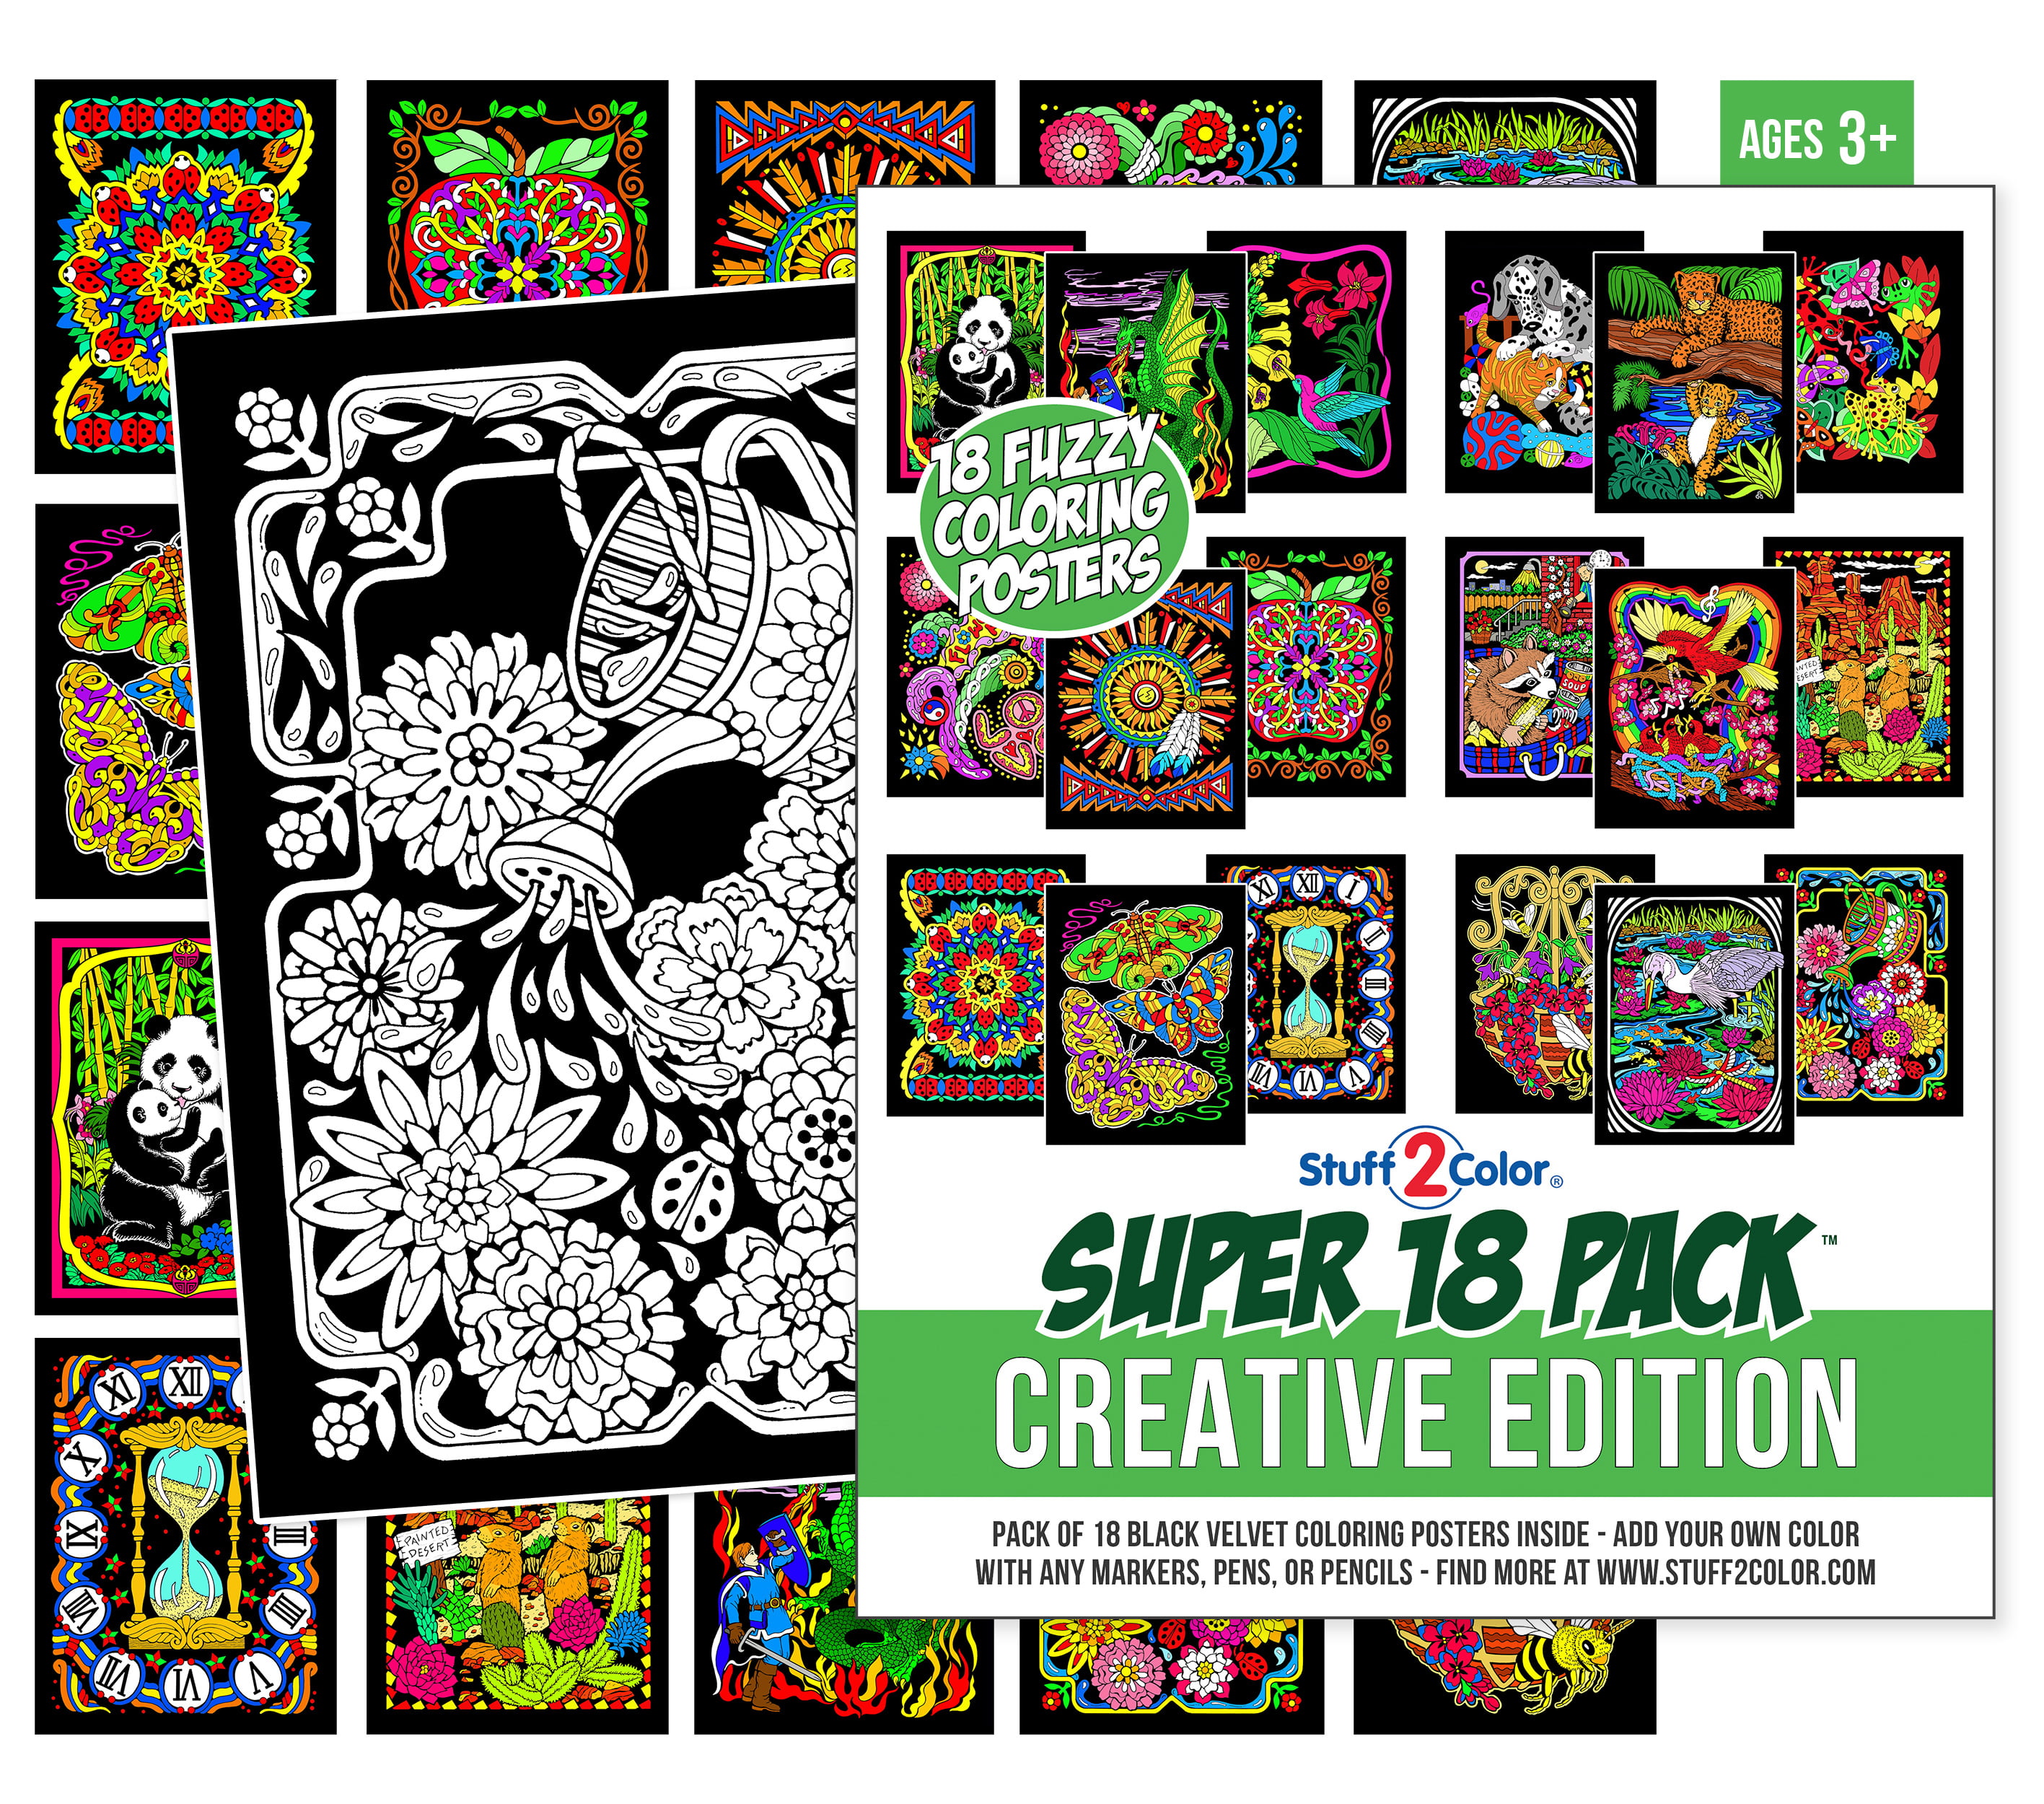 Fuzzy Velvet Coloring Posters USA Cities to Color New York, Miami, New  Orleans, San Francisco, and San Antonio on OnBuy